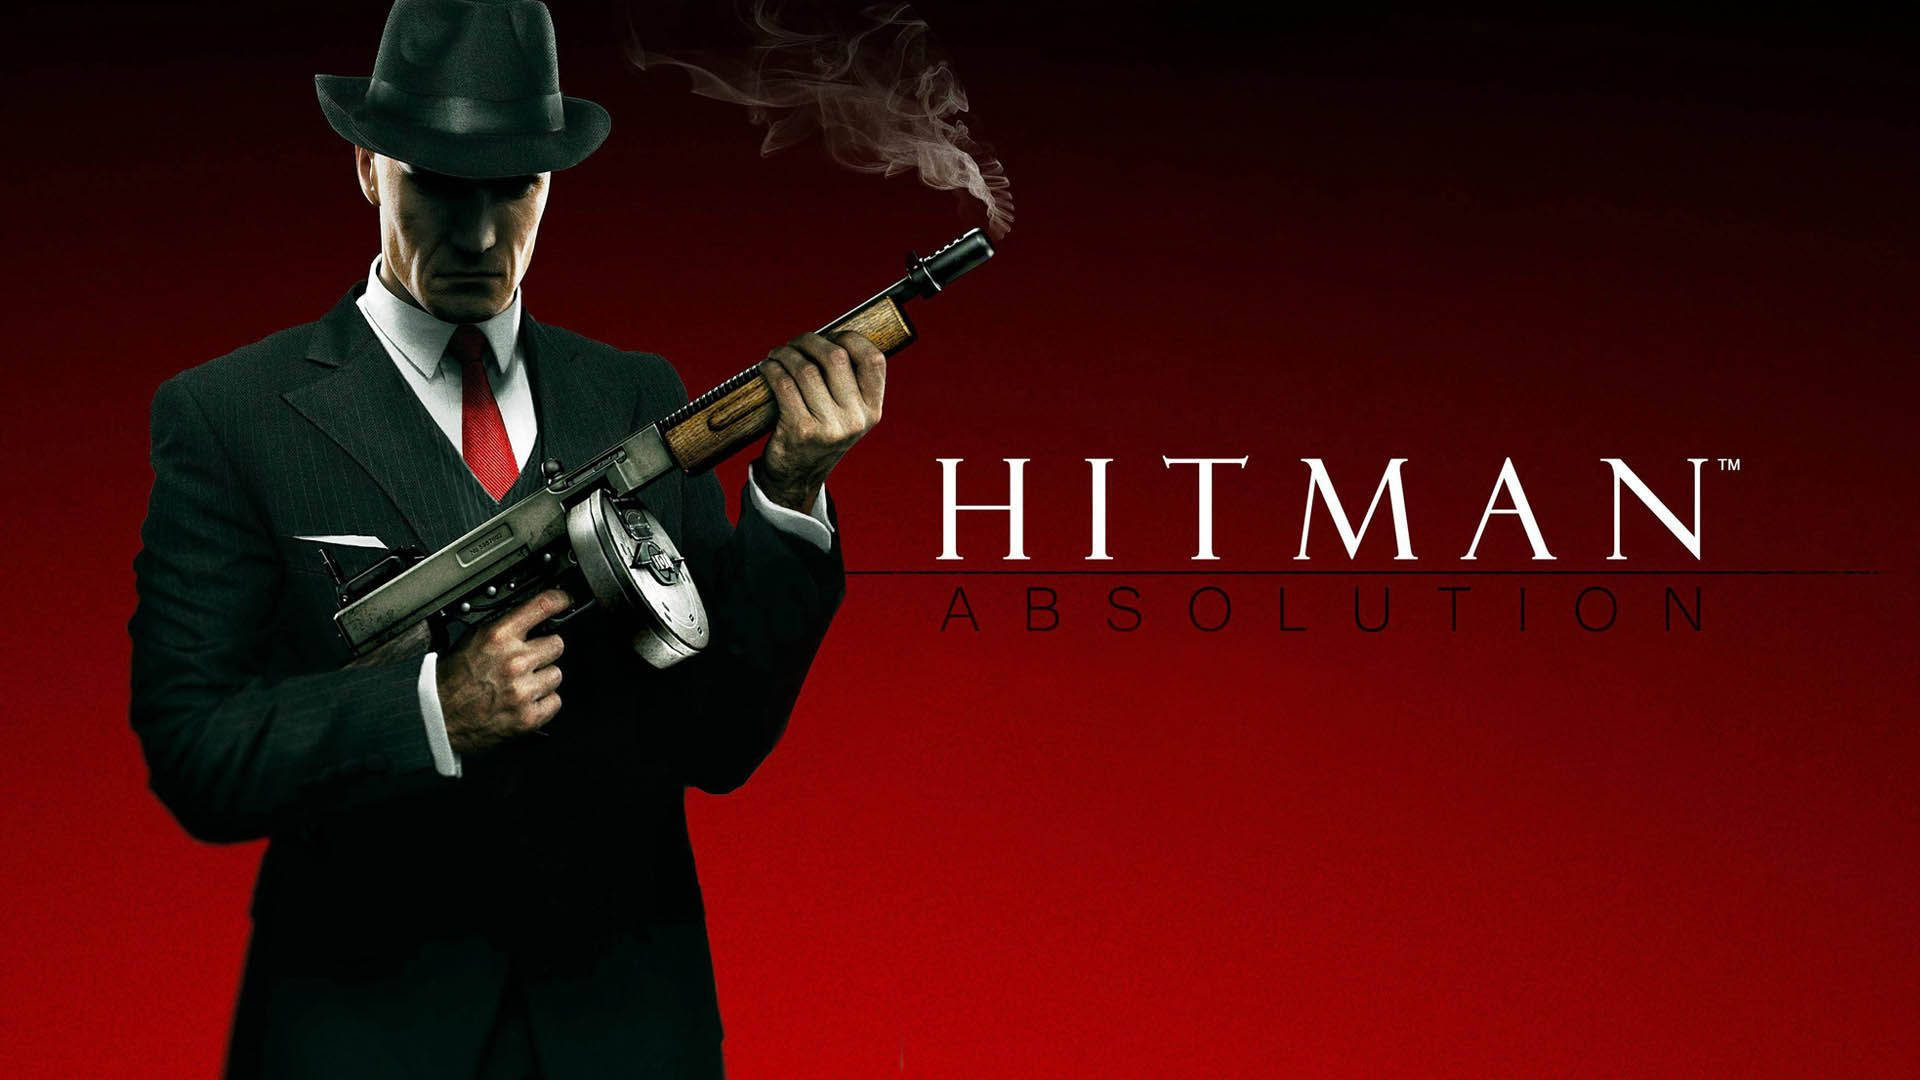 The Video Game Hitman Absolution Background